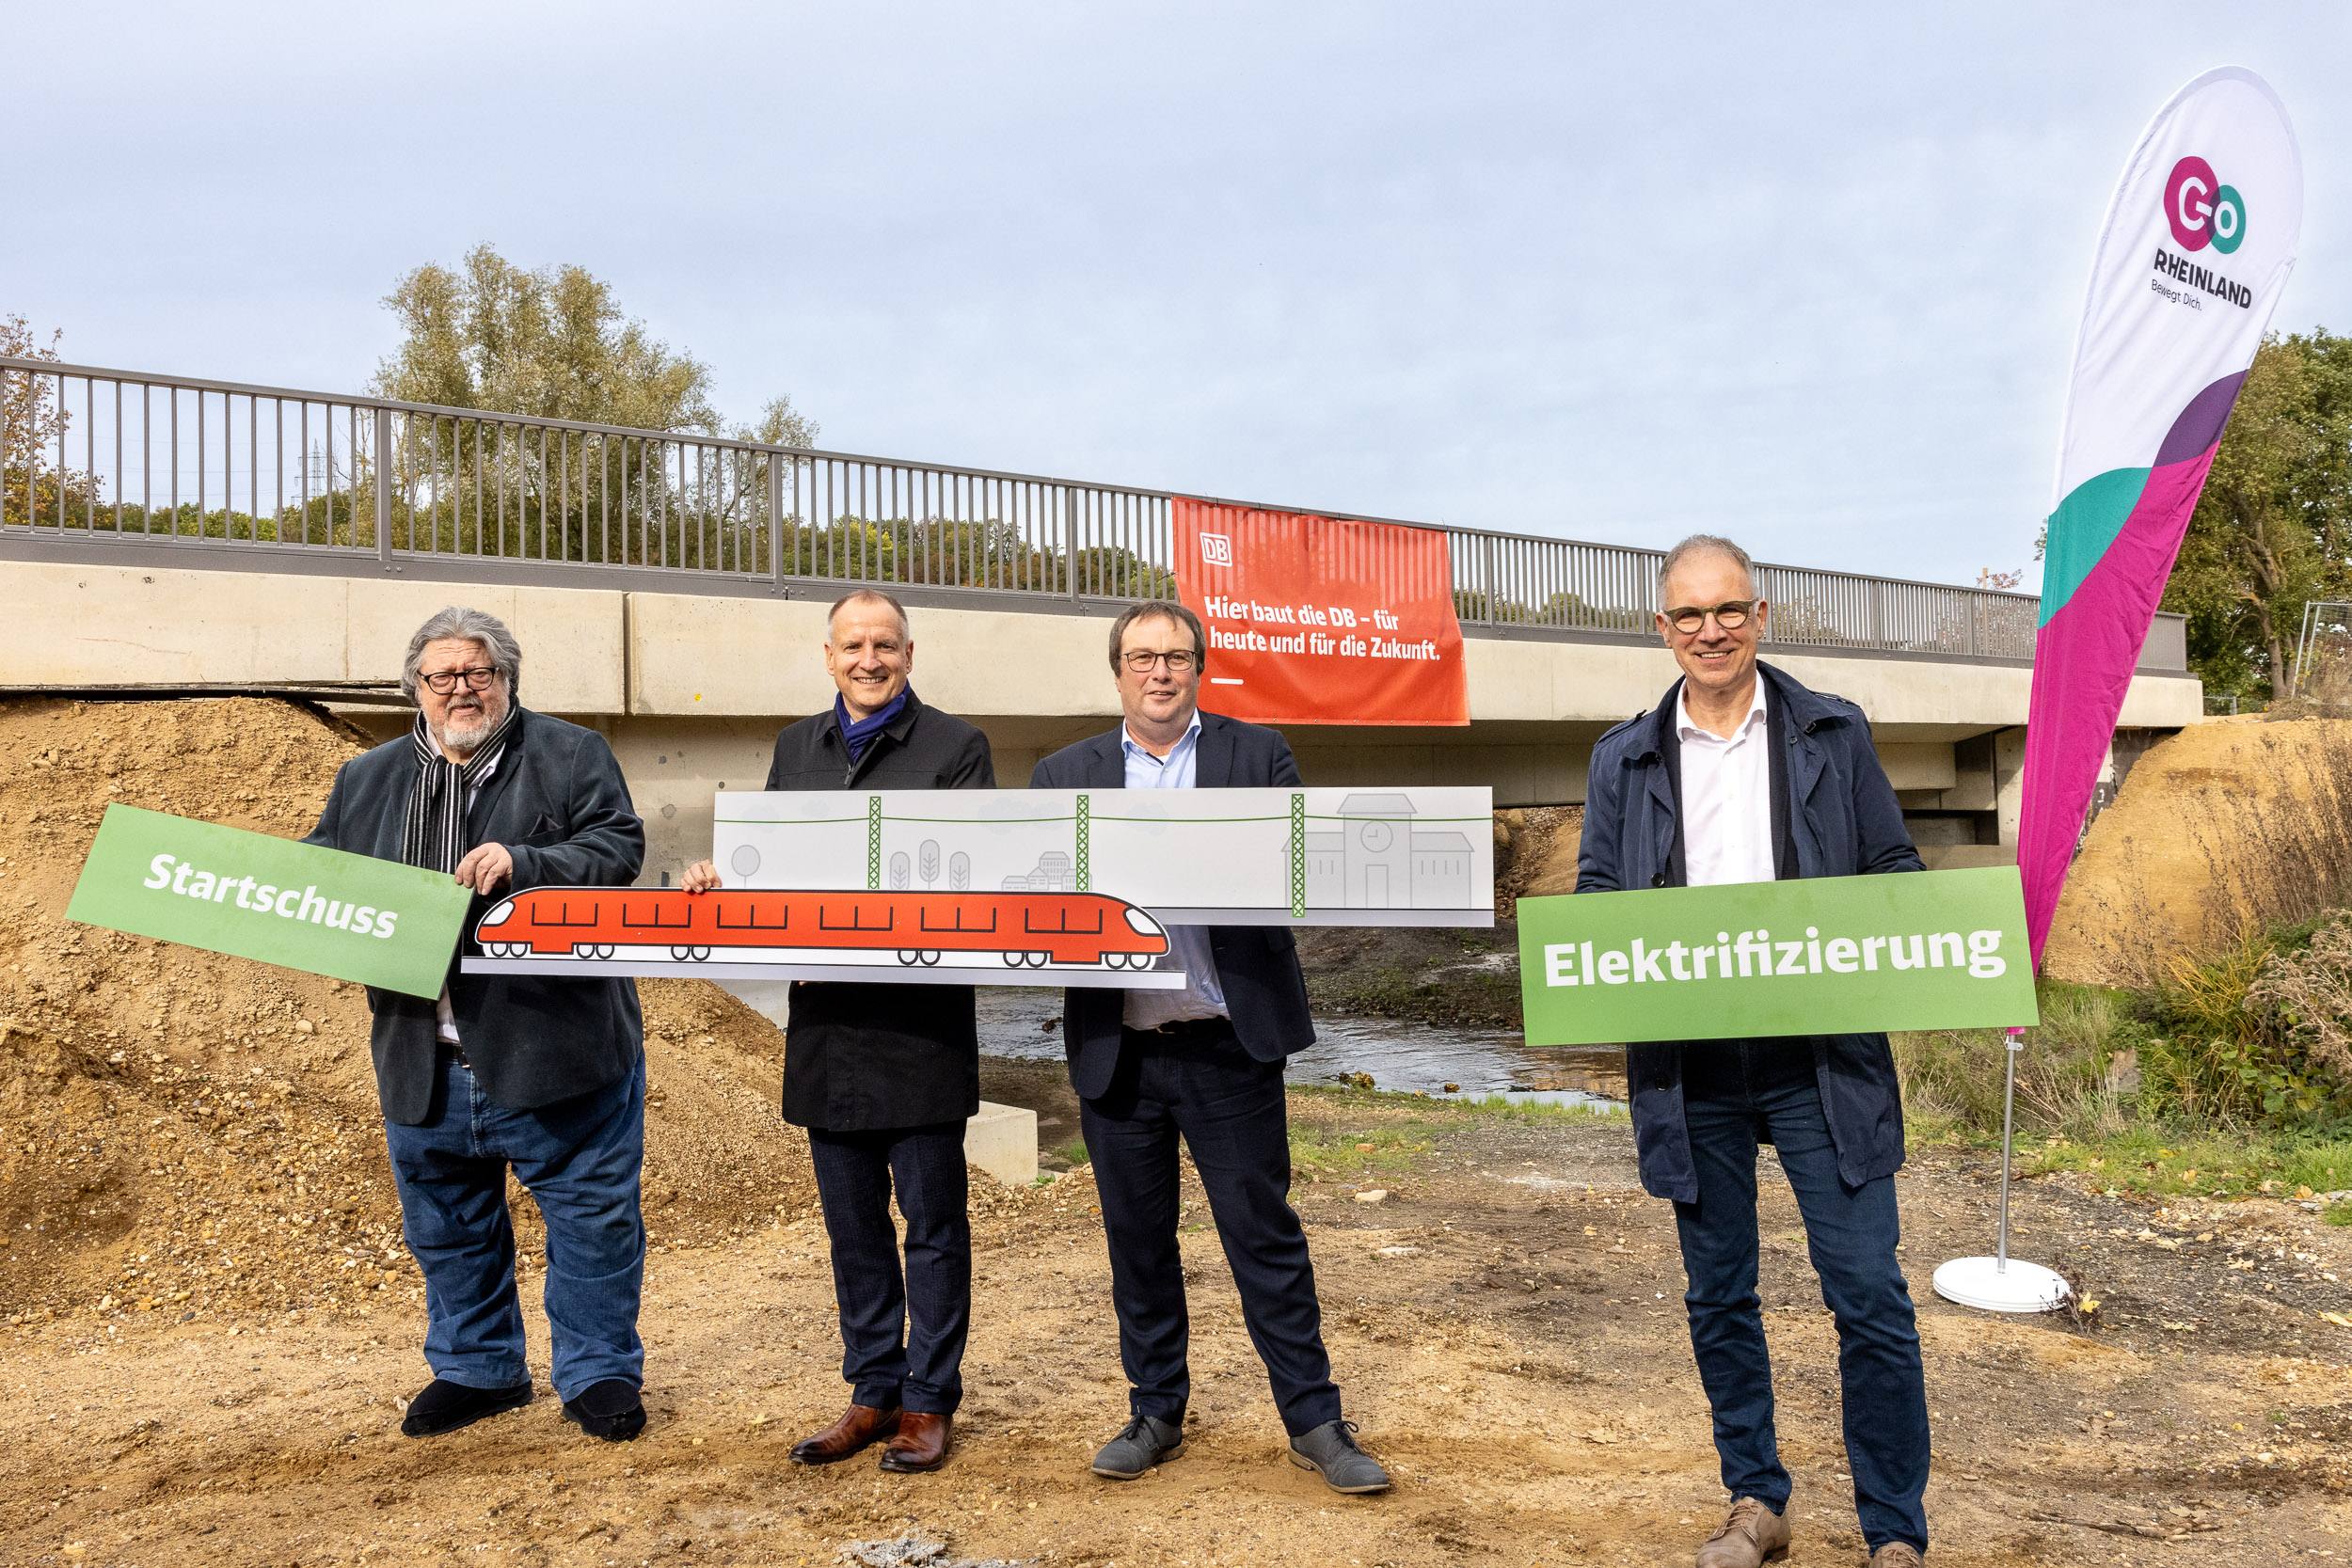 Riesige LED-Wand an Kreuzung in Werdohl geplant